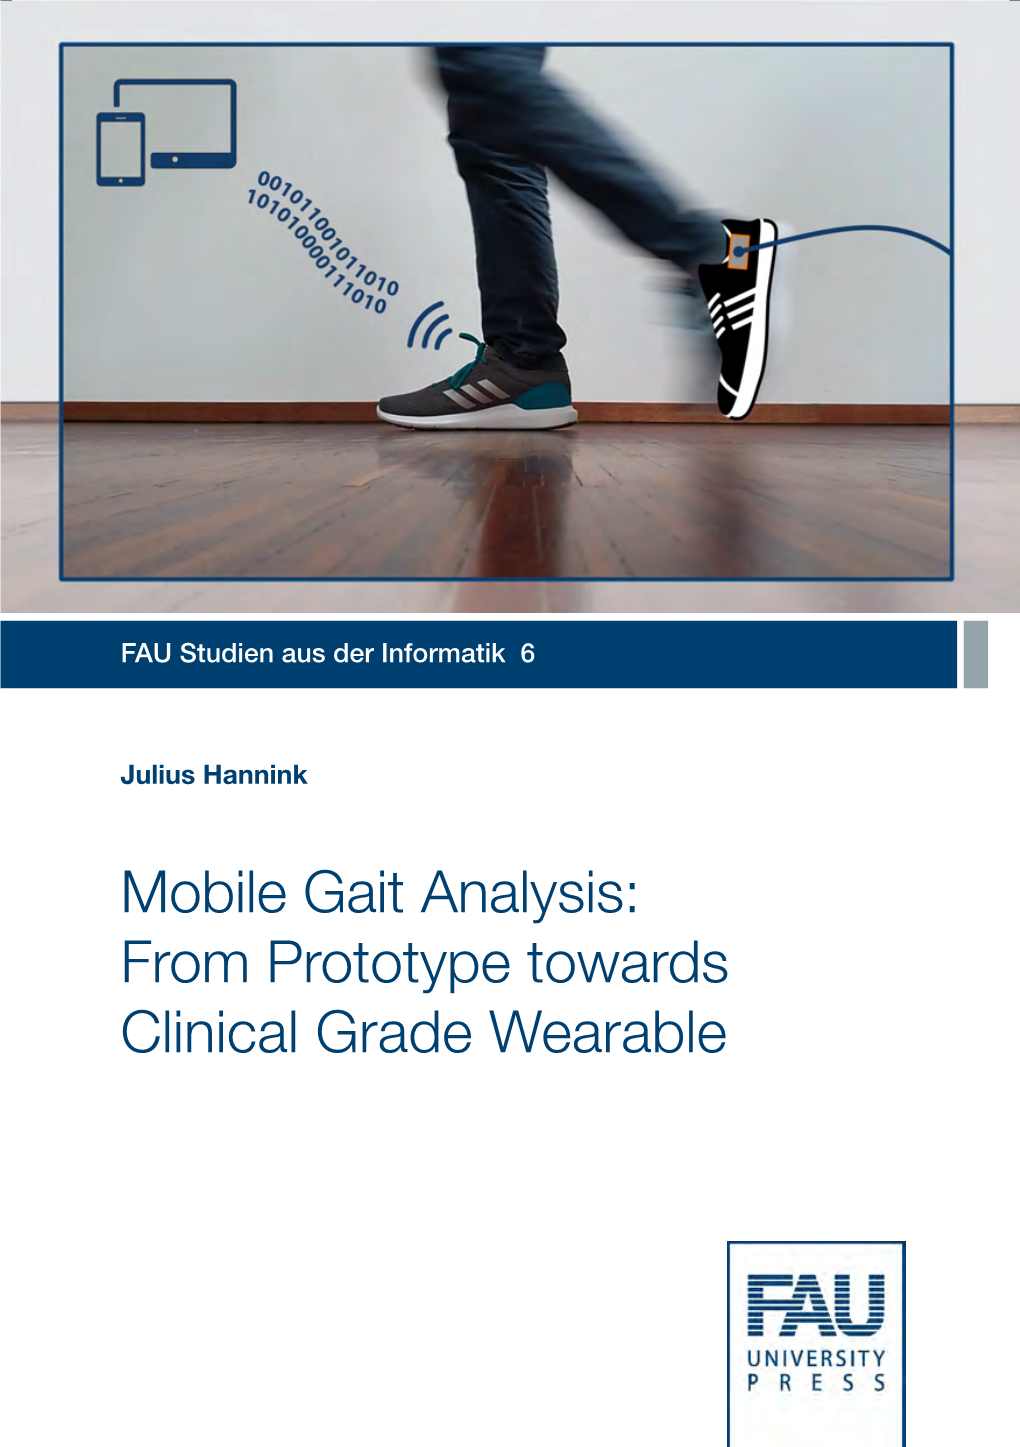 Mobile Gait Analysis: from Prototype Towards Clinical Grade Wearable